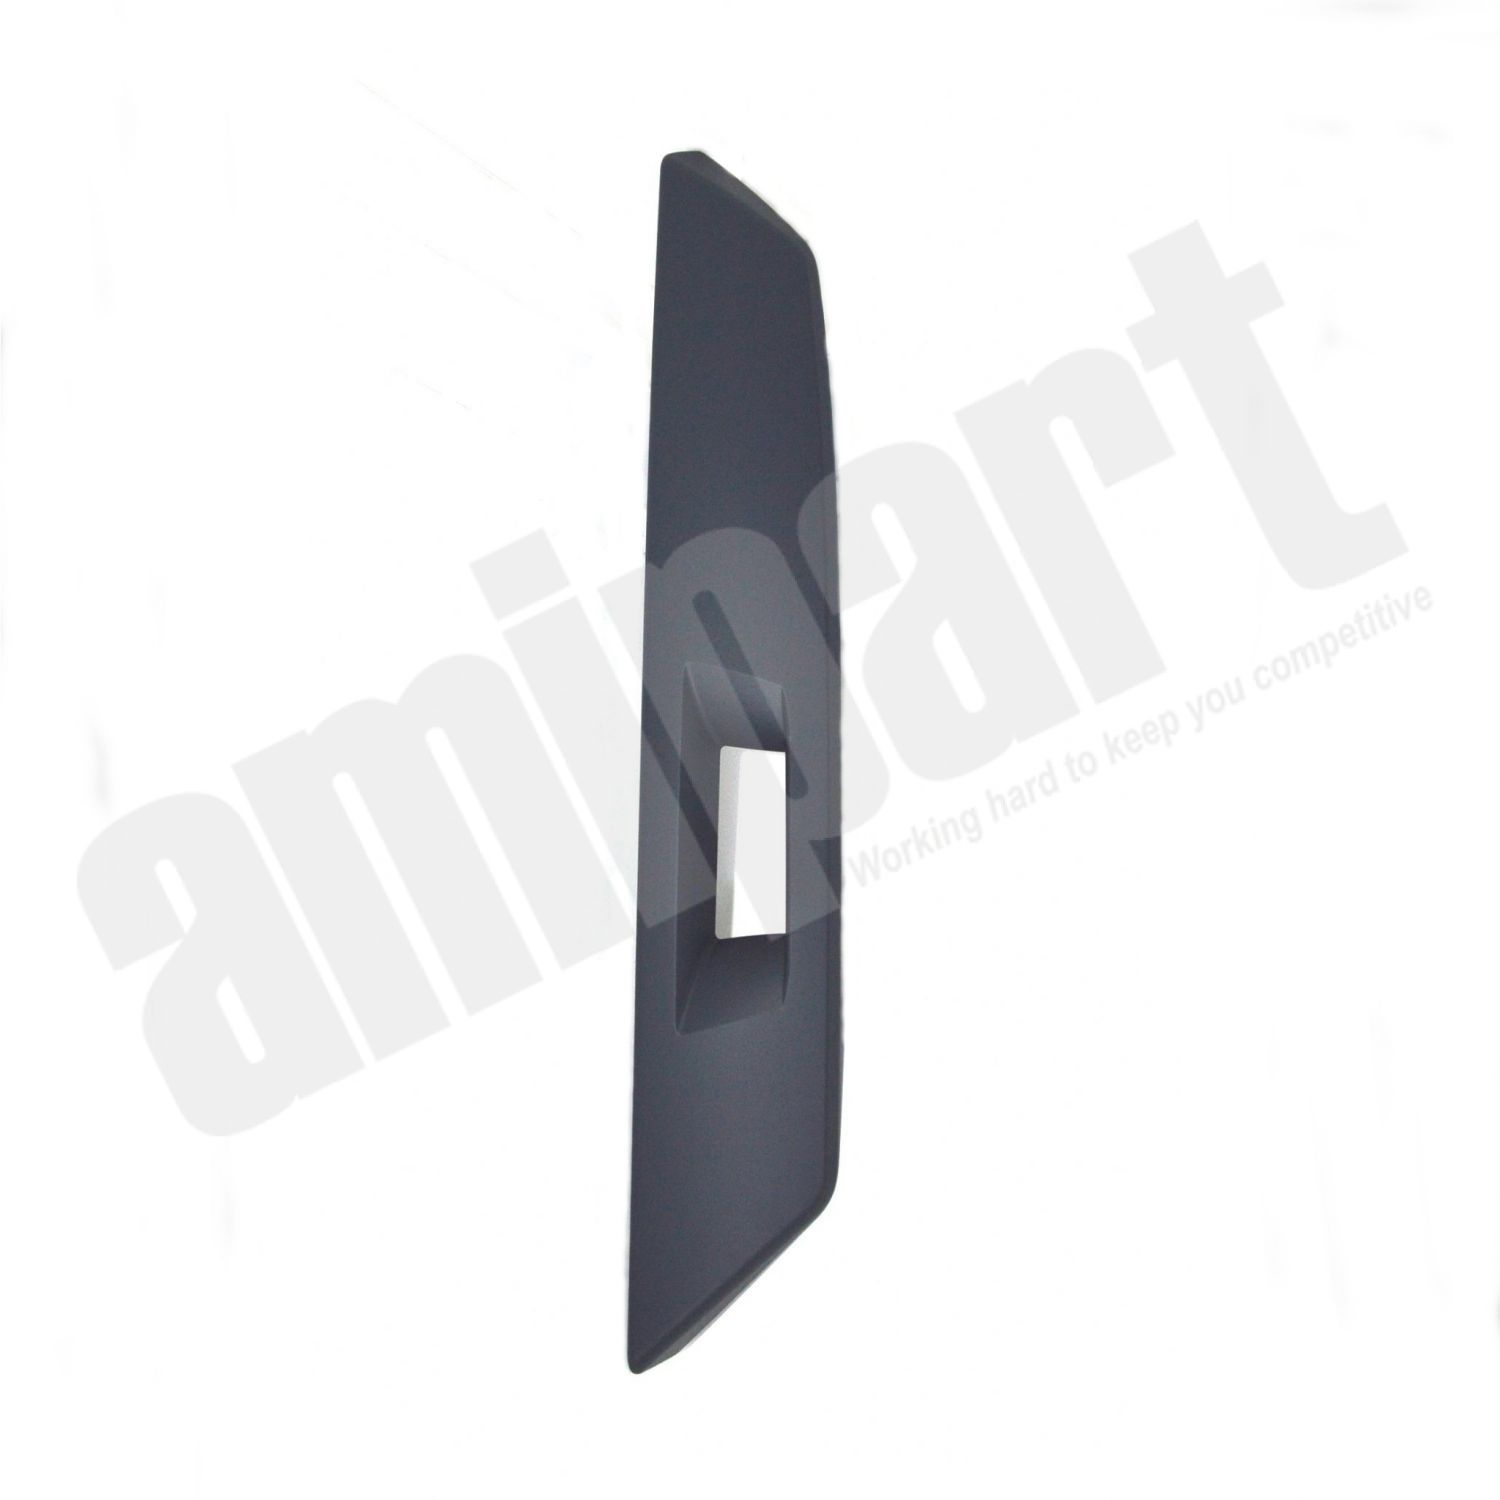 Amipart : MIRROR BACK COVER LH-AM7731